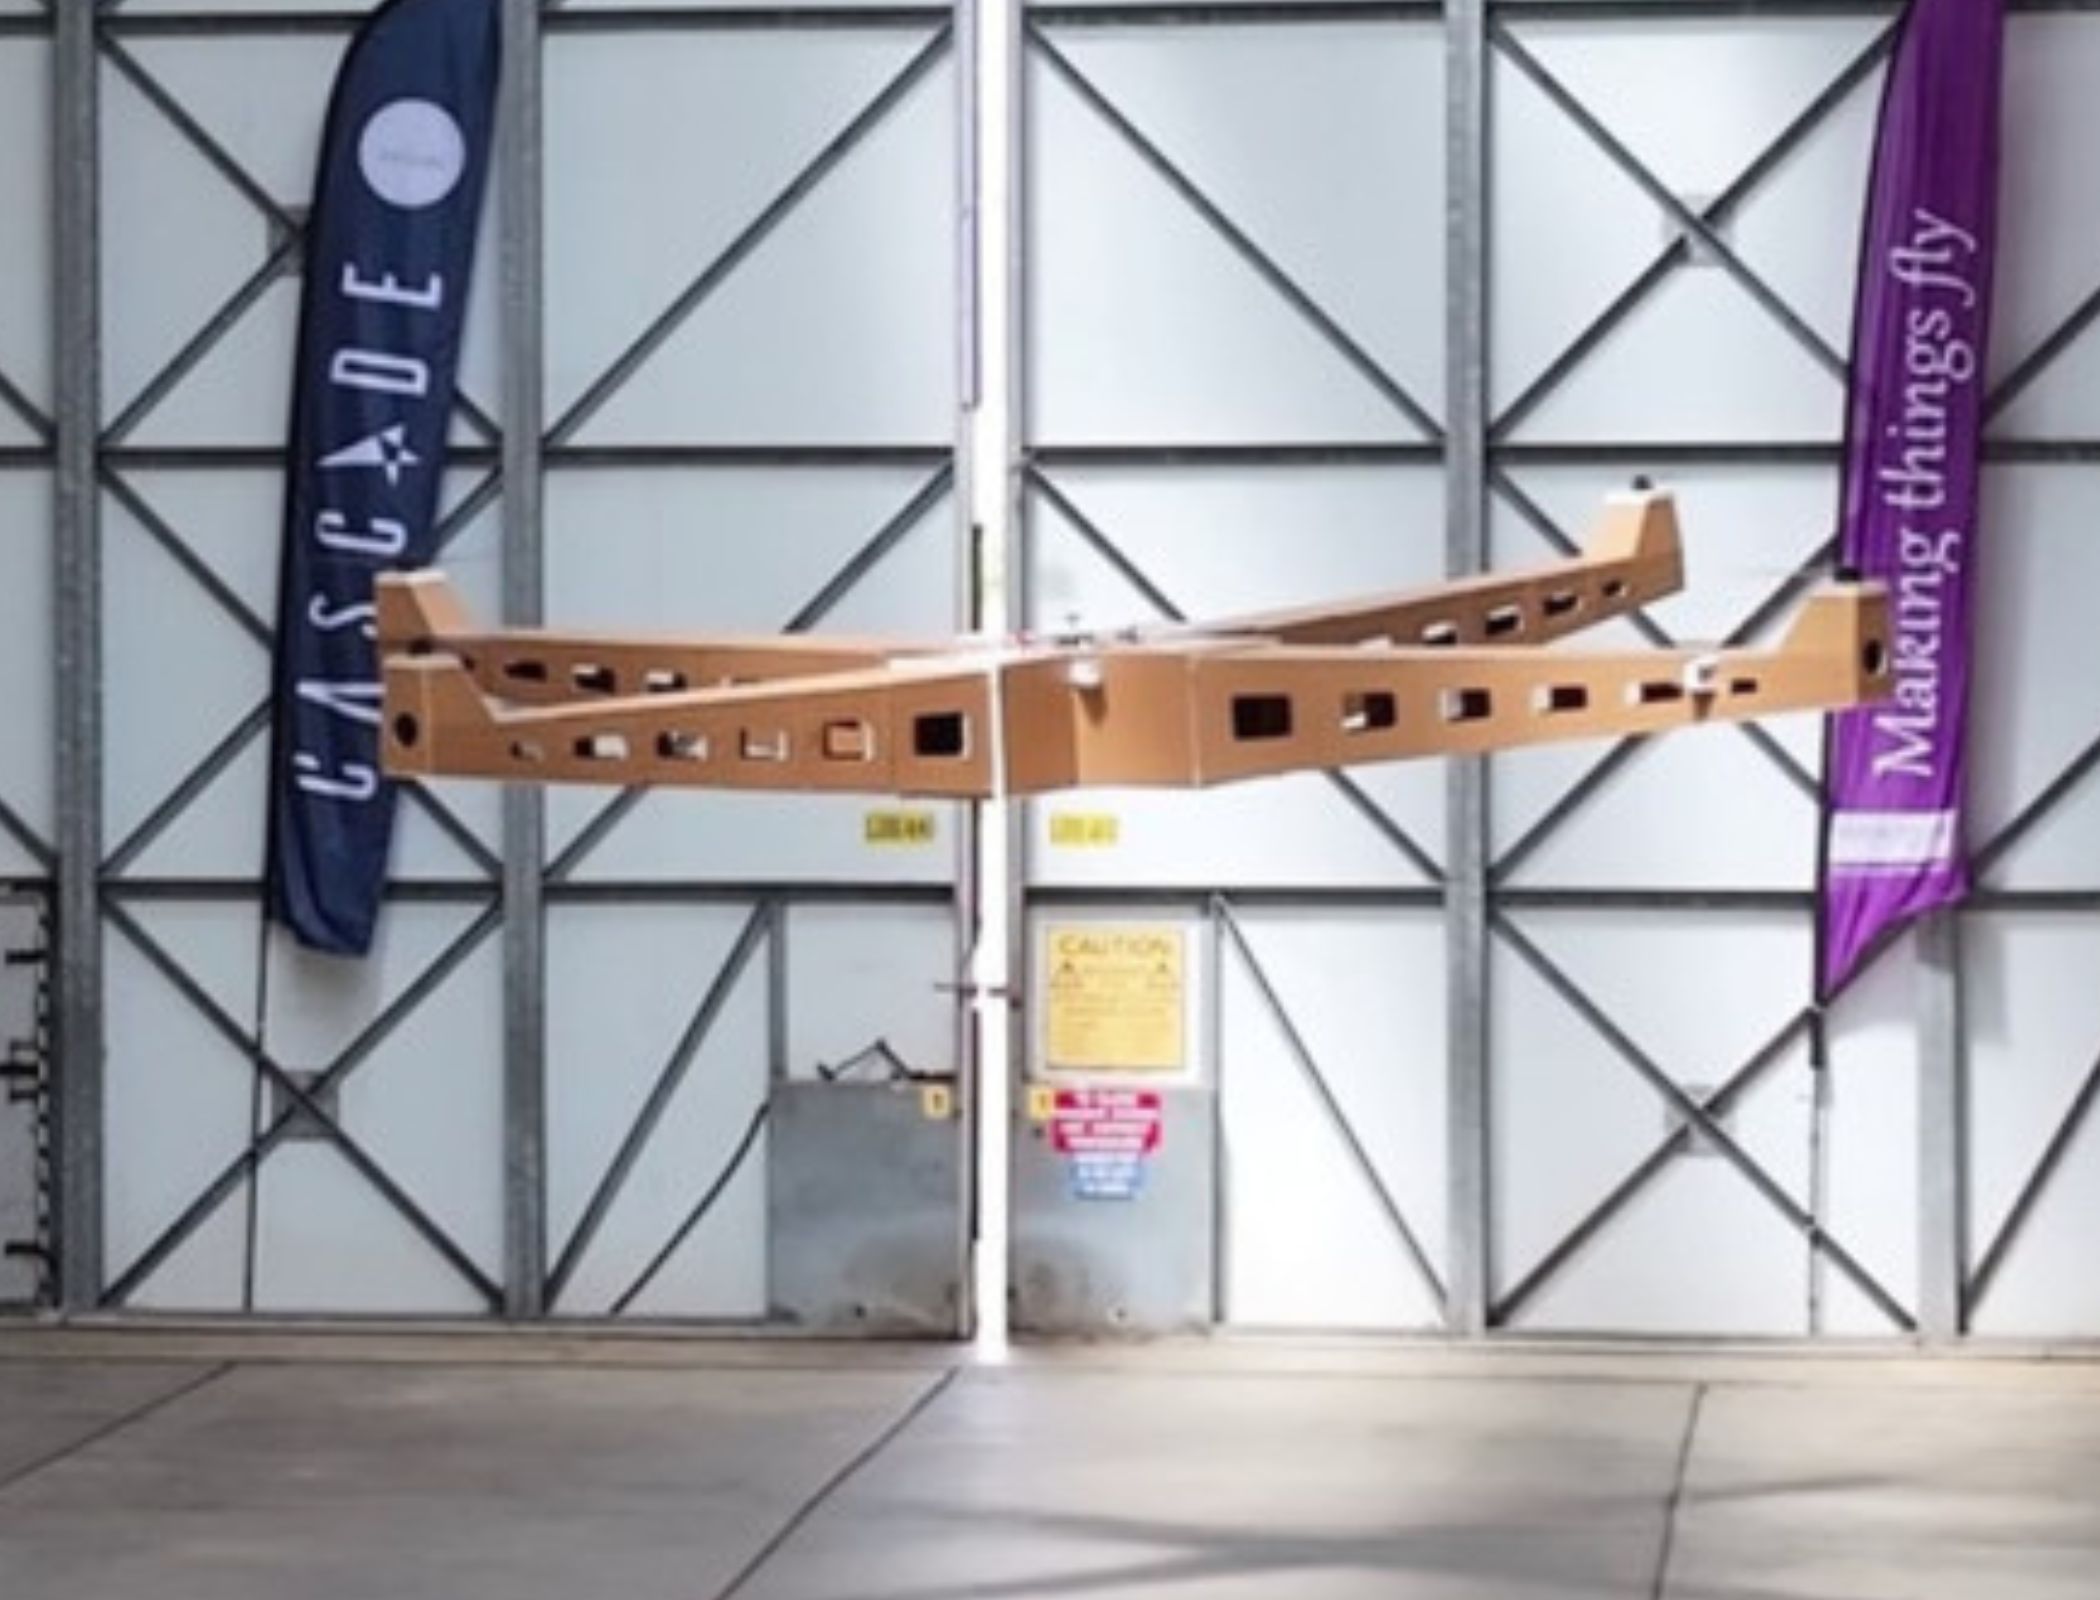 Researchers fly world’s largest quadcopter drone